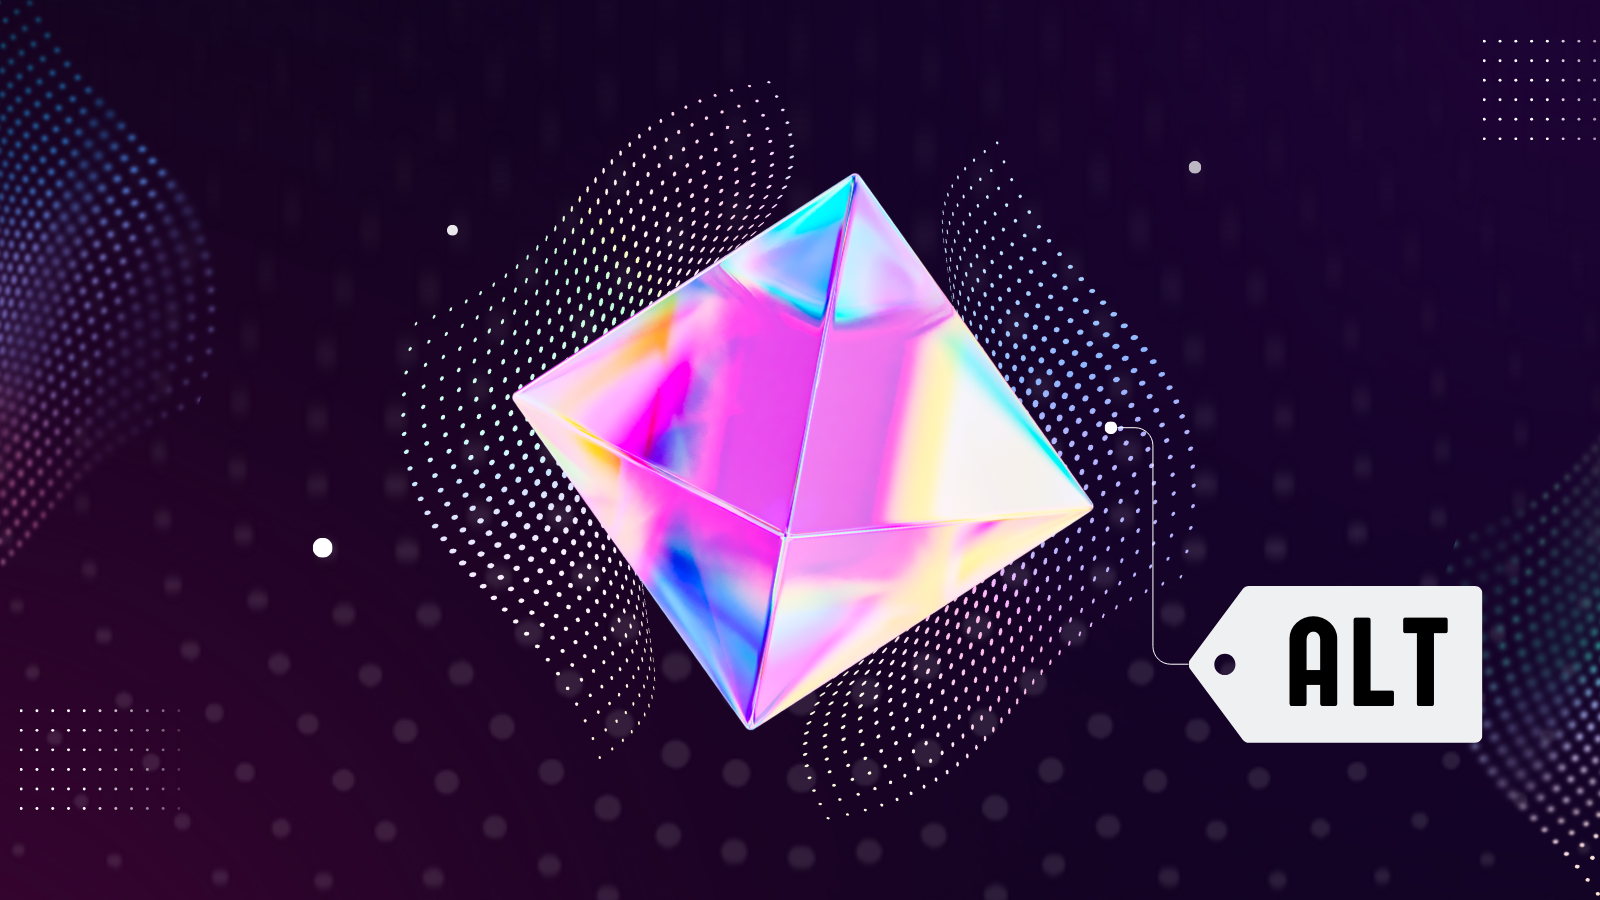 A striking, holographic diamond-shaped object with a gradient of pink and purple floats centrally against a black background